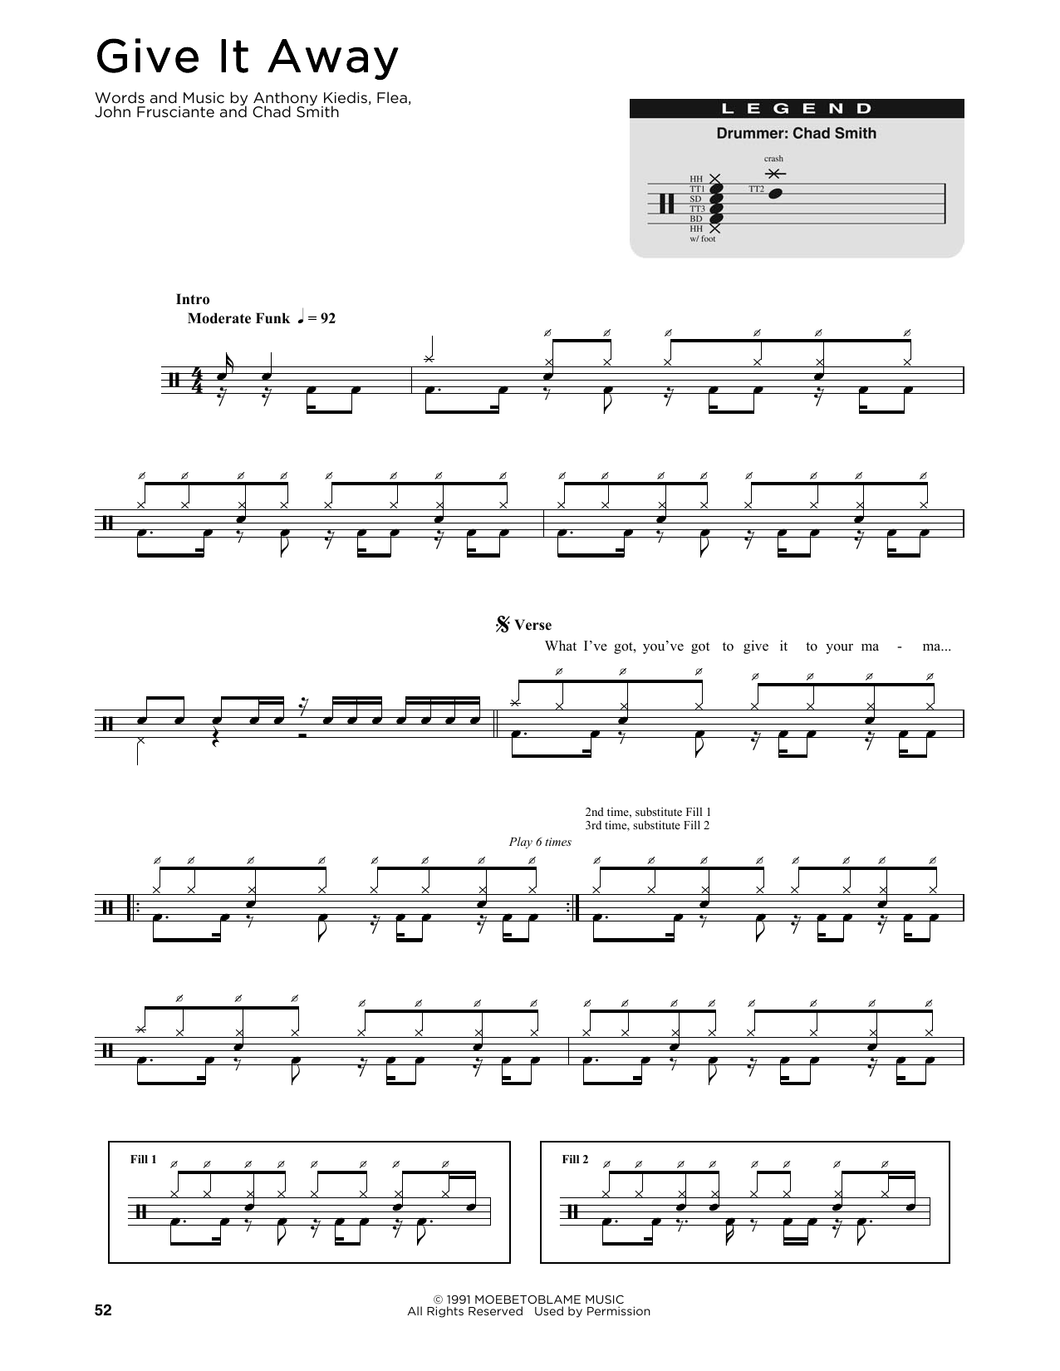 Give It Away - Red Hot Chili Peppers - Full Drum Transcription / Drum Sheet Music - SheetMusicDirect DT176337